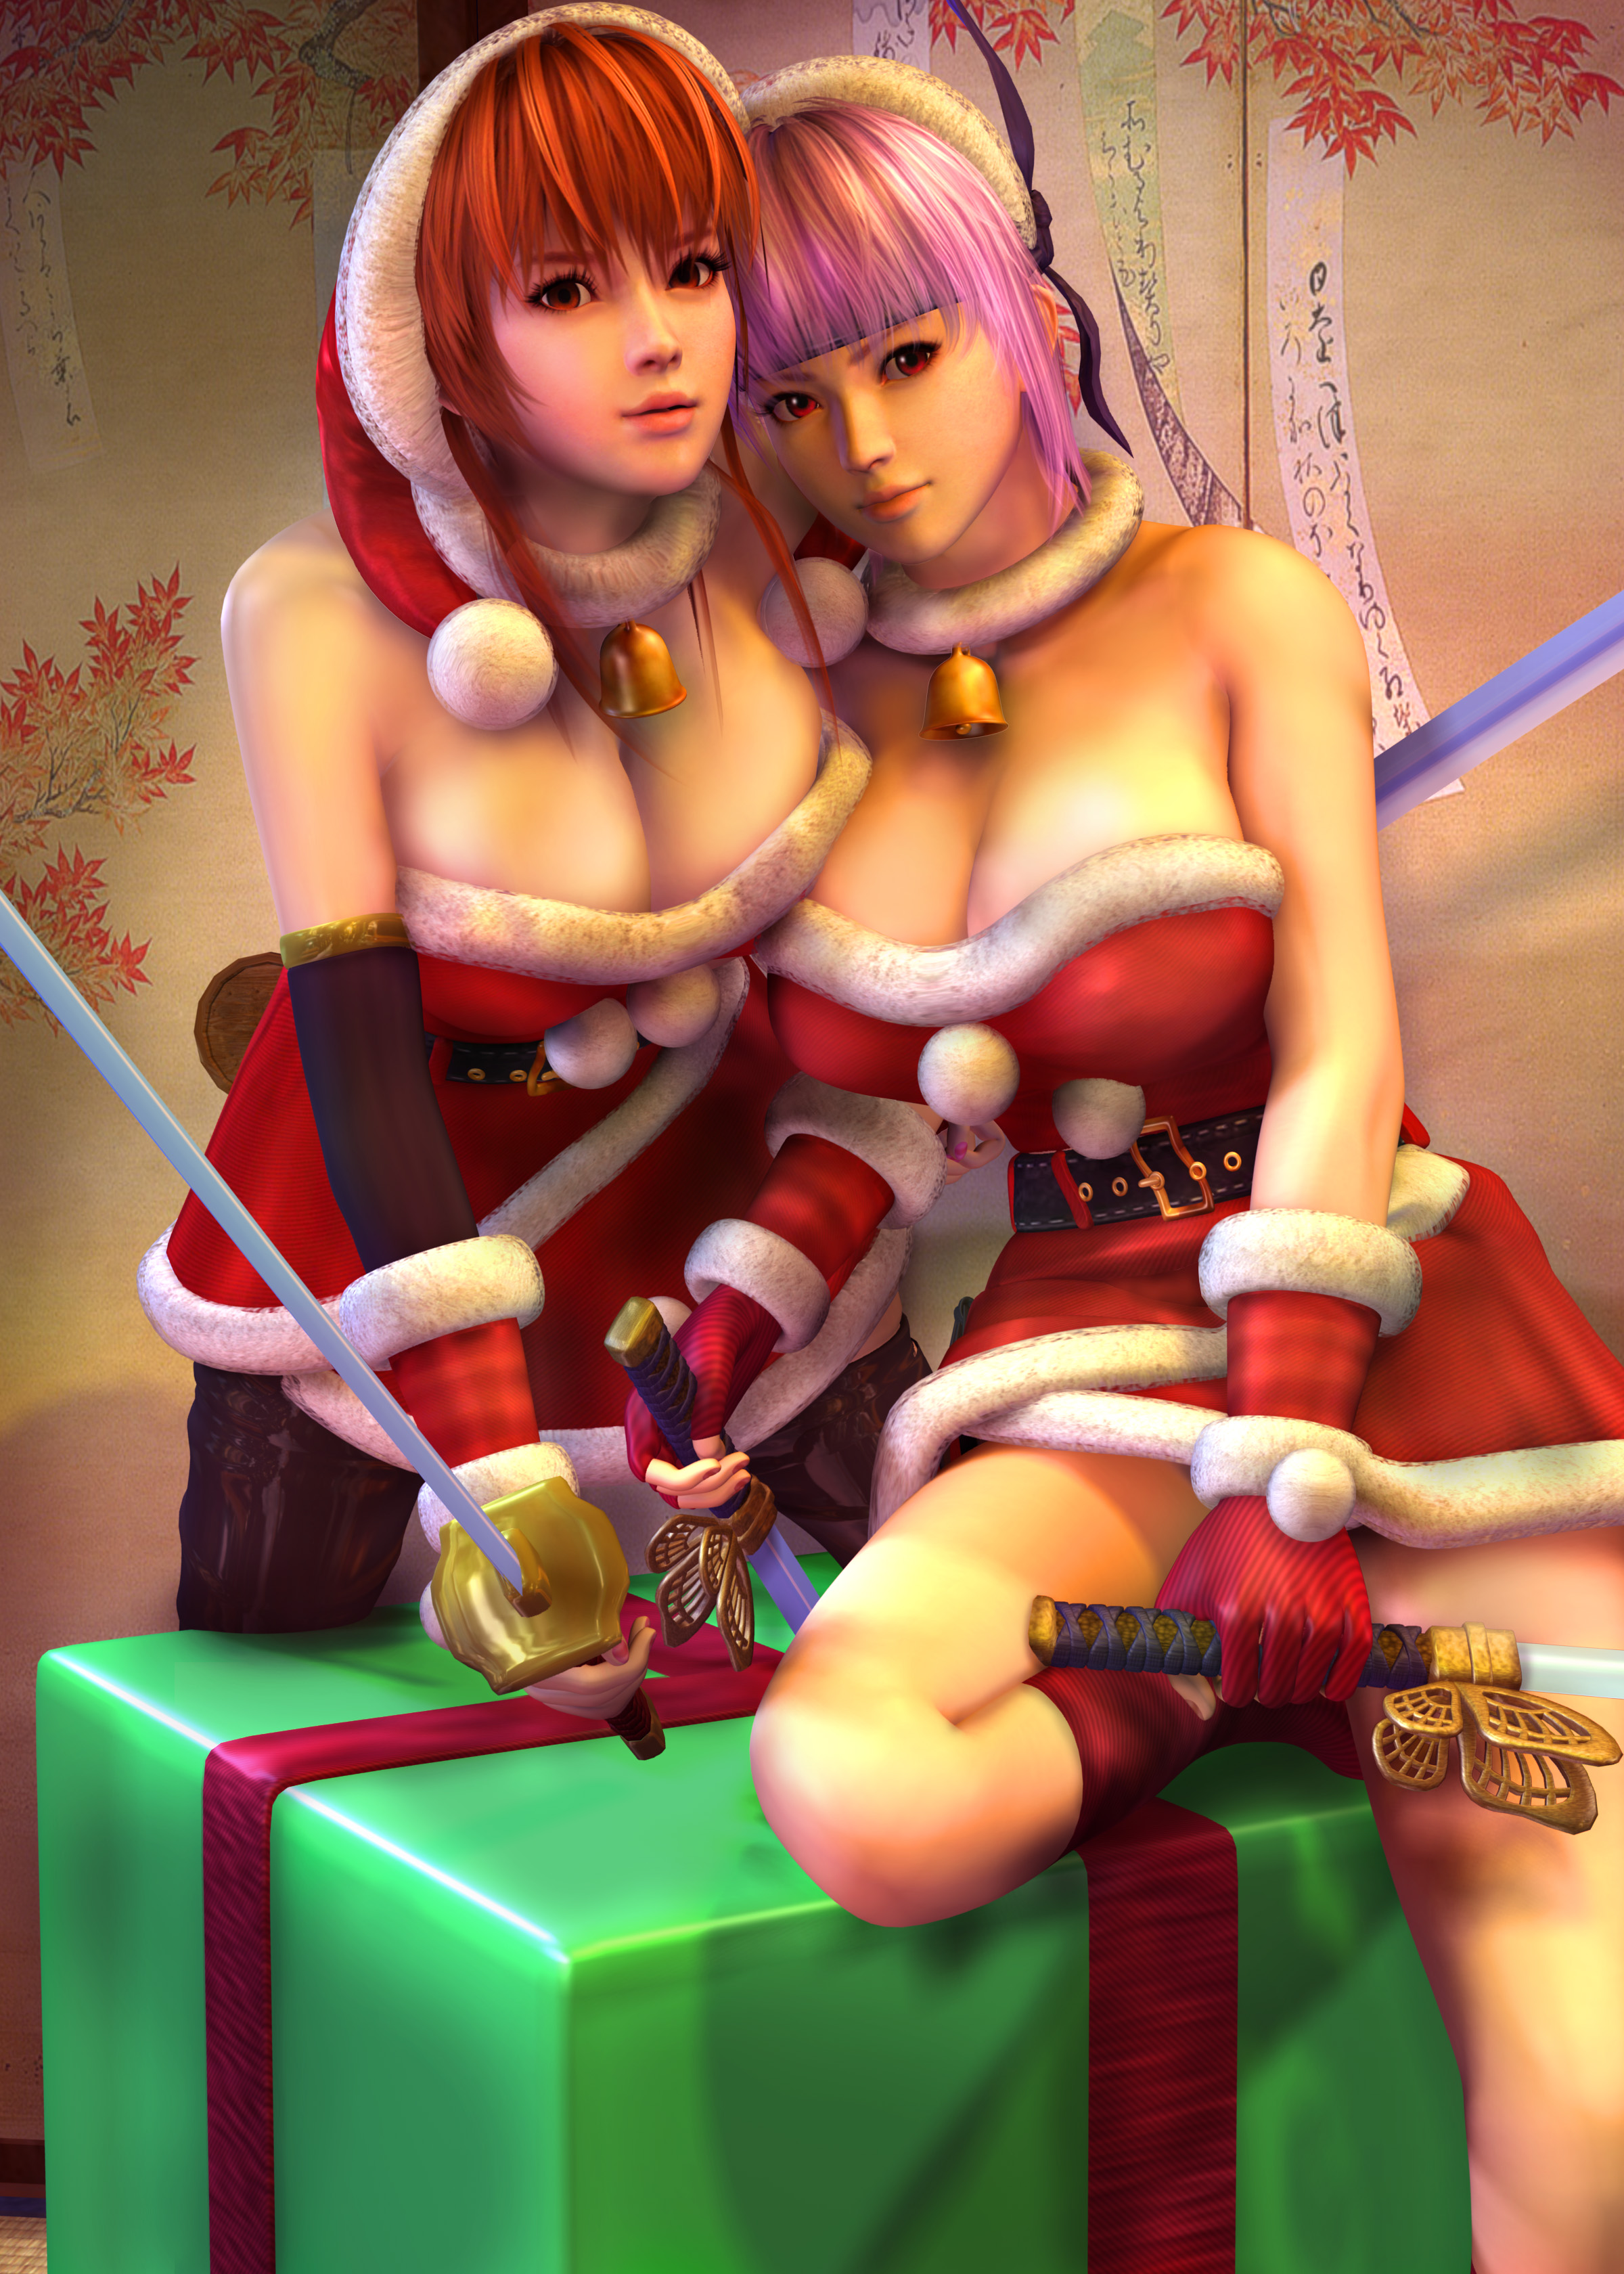 merry_christmas_by_3dbabes-d5ohp39.jpg